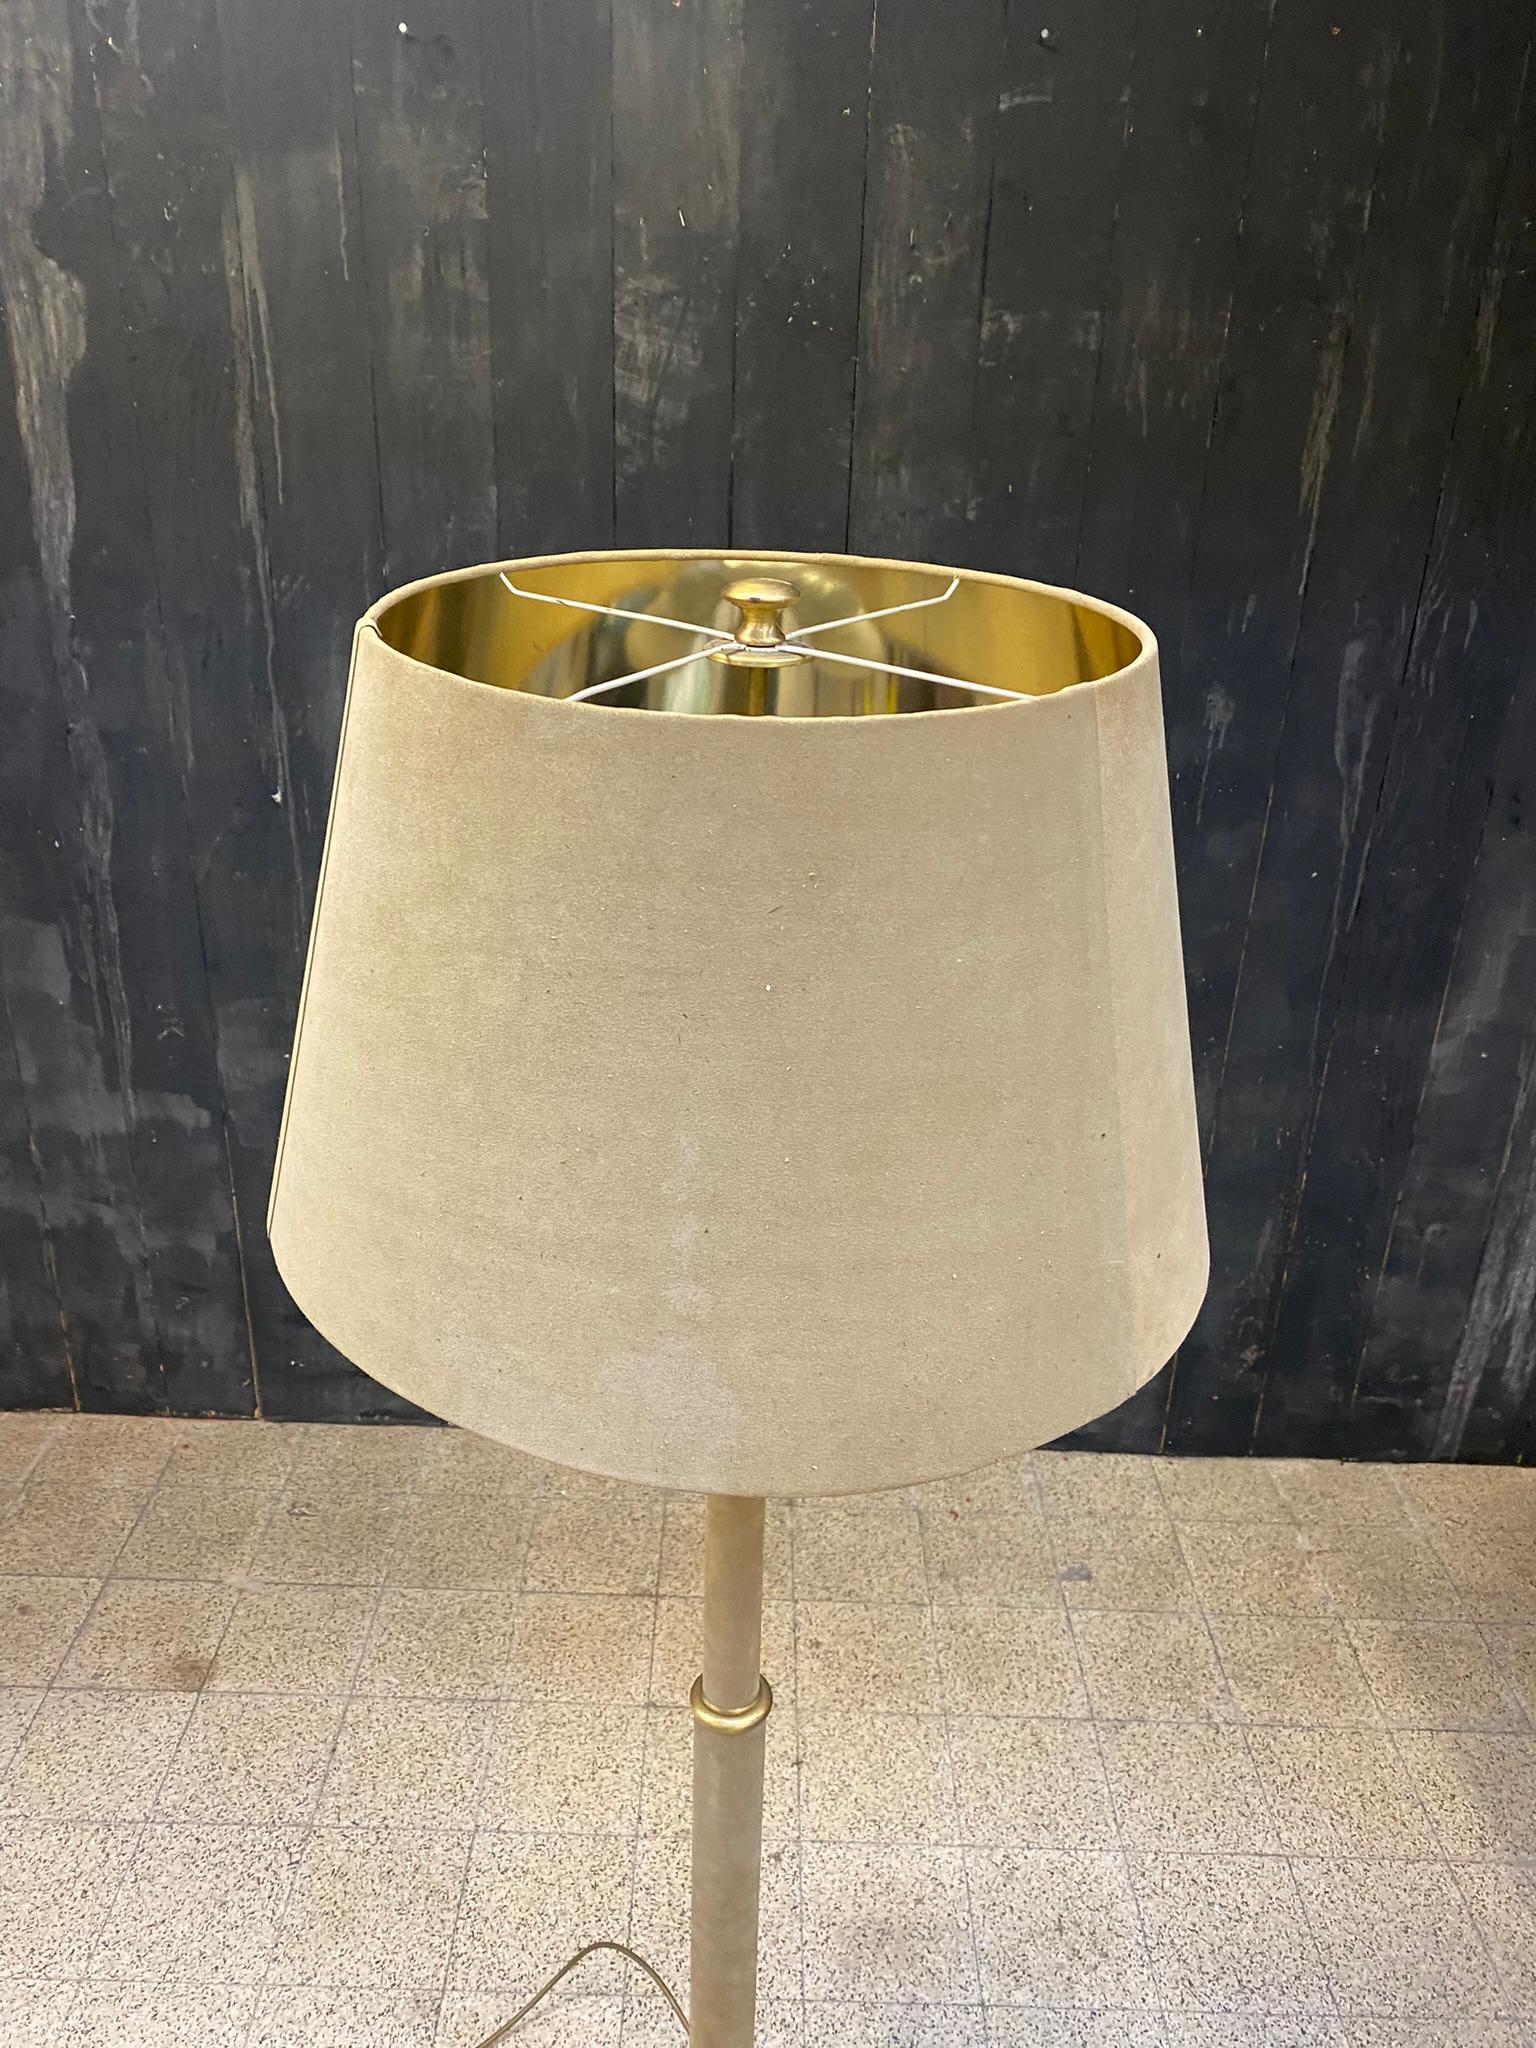 Elegant floor lamp in suede leather in the style of Jacques Adnet.
Foot and lampshade in very good condition.